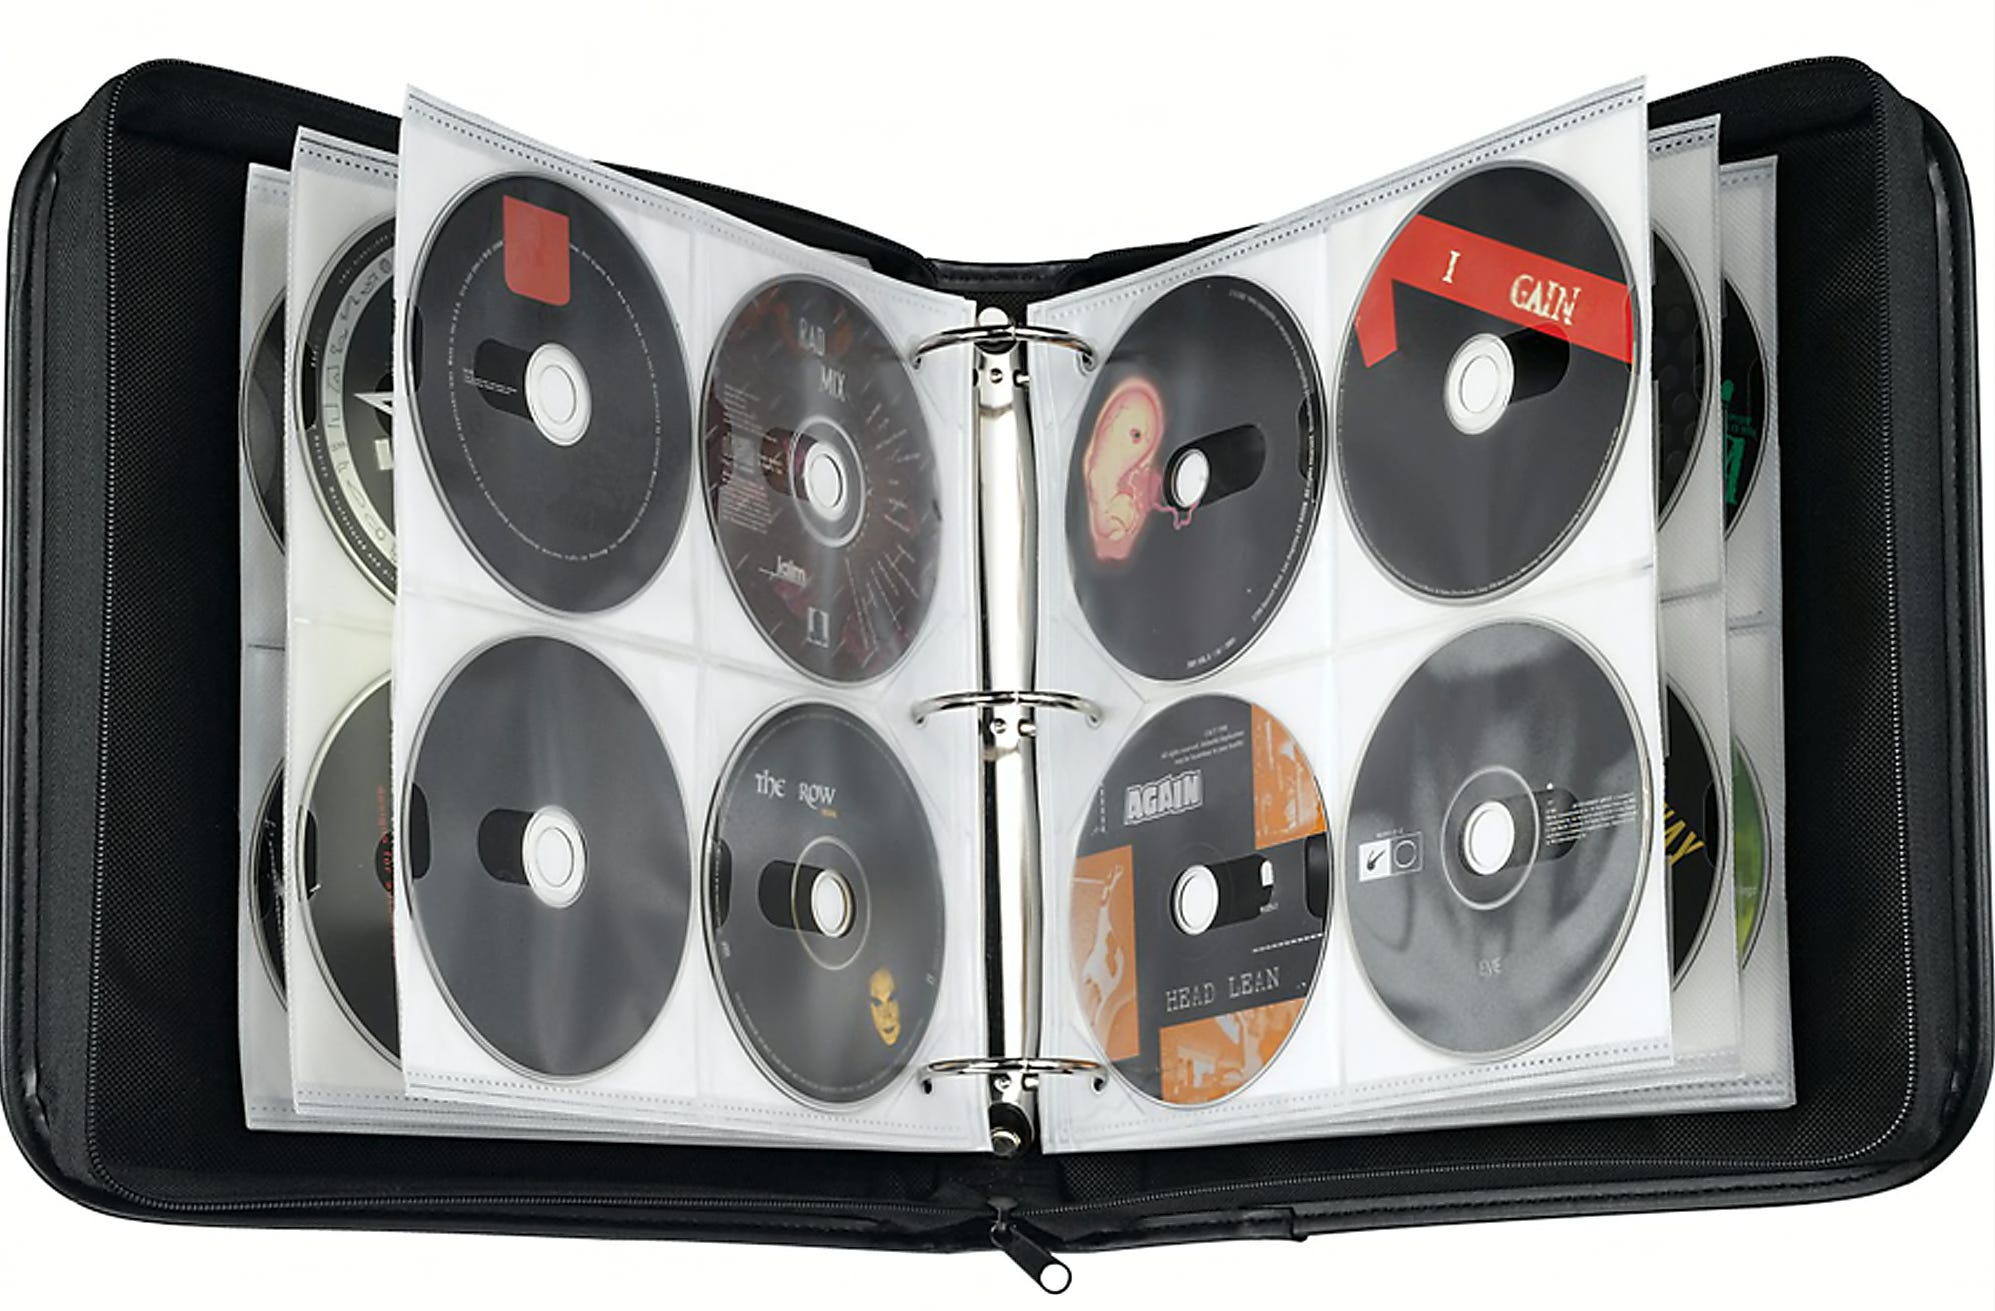 A CD booklet that holds about 200 CDs